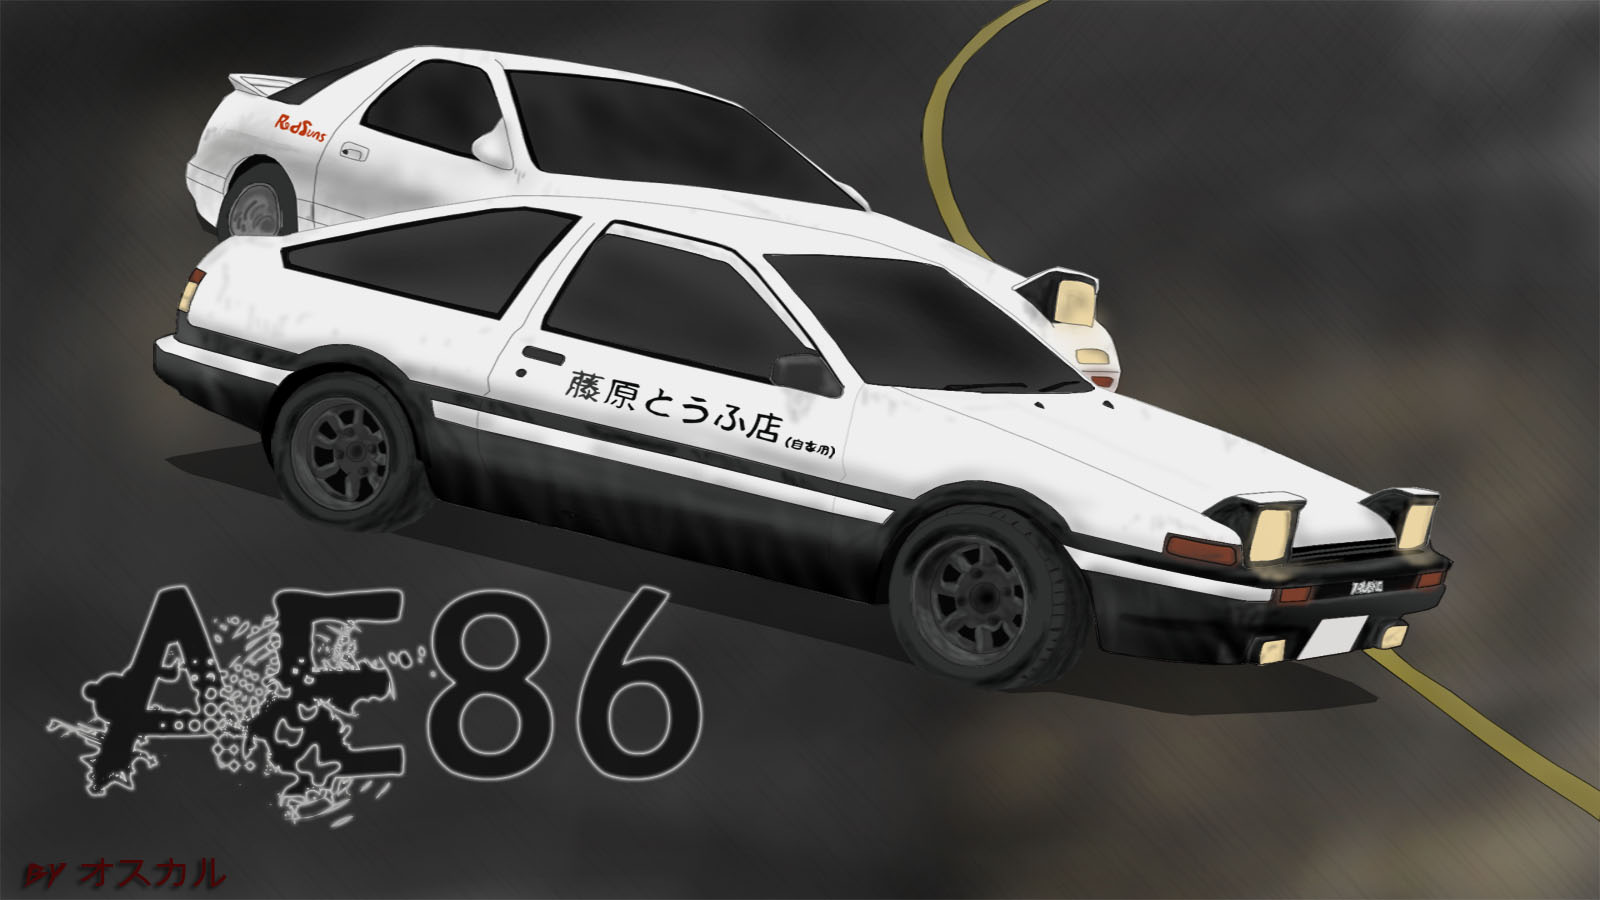 Free Download Initial D Wallpaper 1600x900 169 1600x900 For Your Desktop Mobile Tablet Explore 68 Initial D Wallpapers Initial D Wallpaper Hd Initial Wallpaper For Computer Cute Wallpapers With Initials